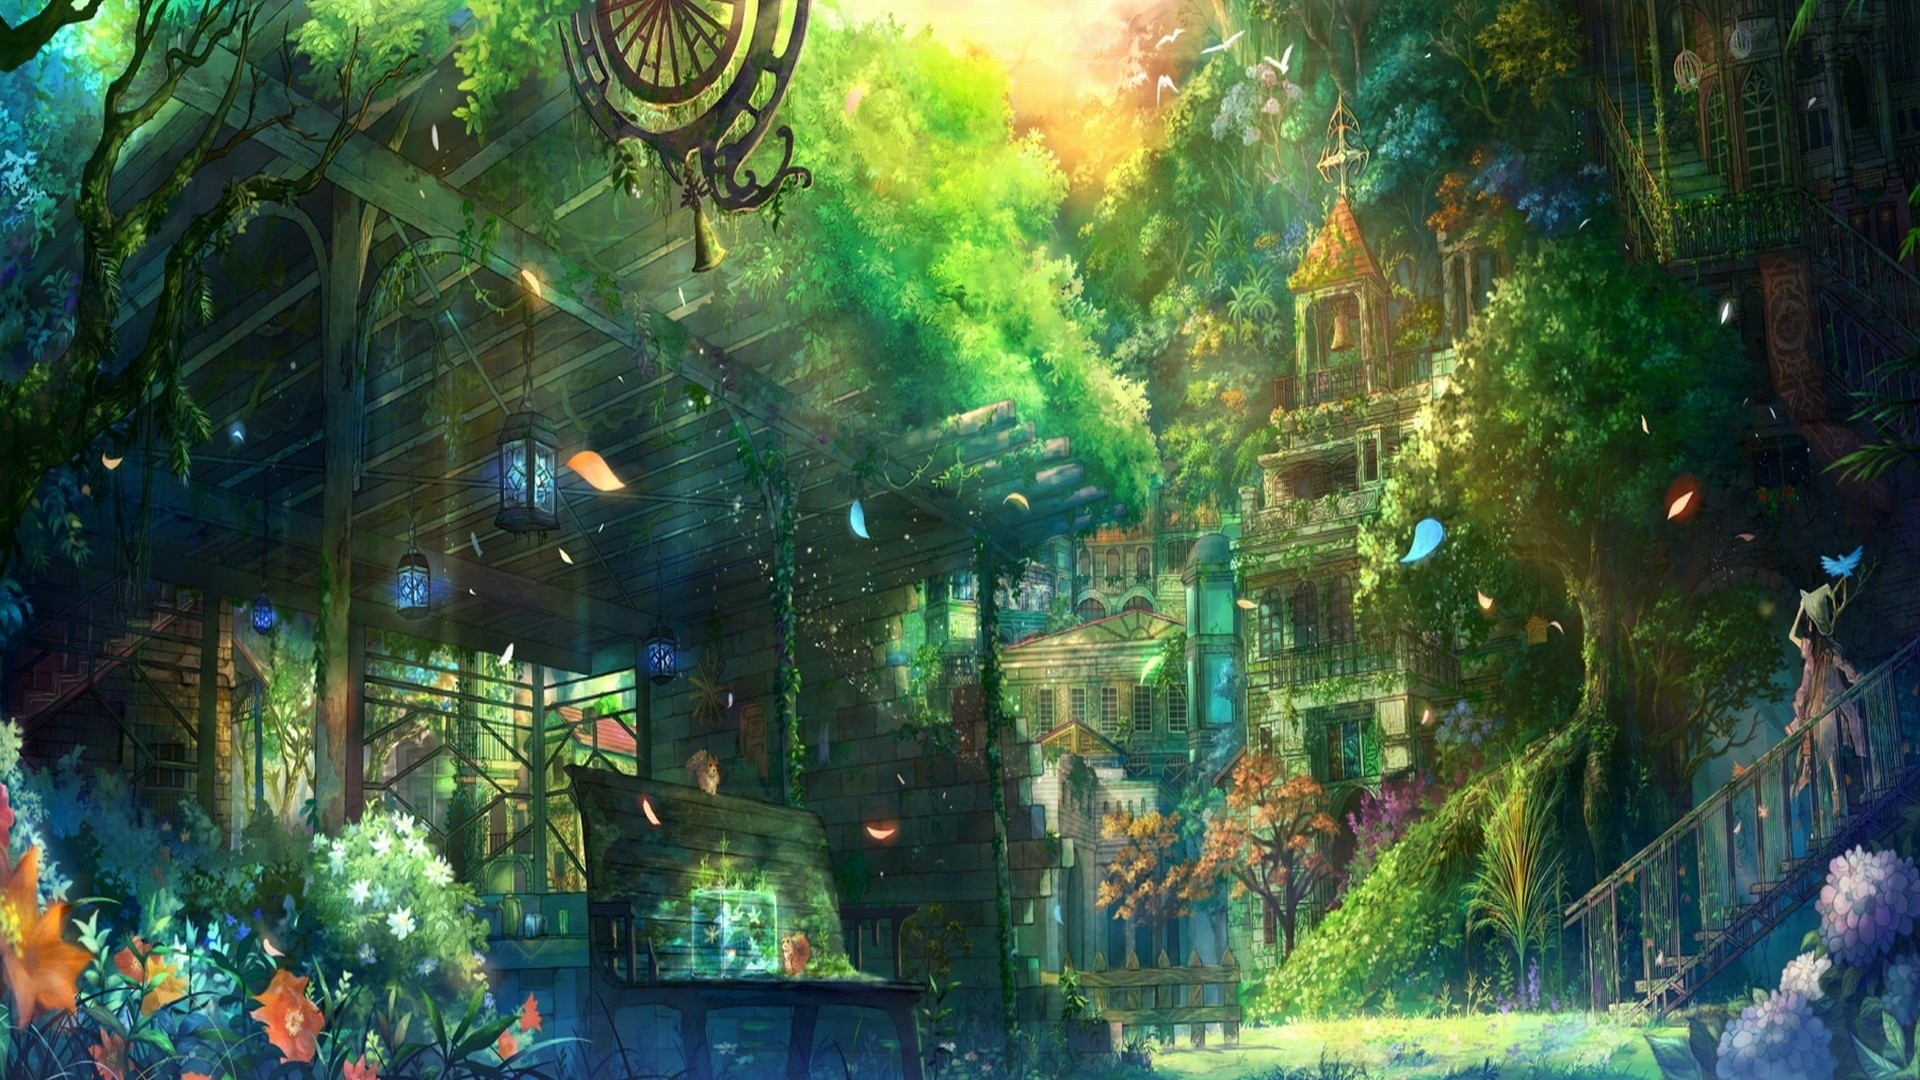 1920x1080 Anime City Scenery Wallpapers High Definition with High Definition Wallpaper   px 1.44 MB